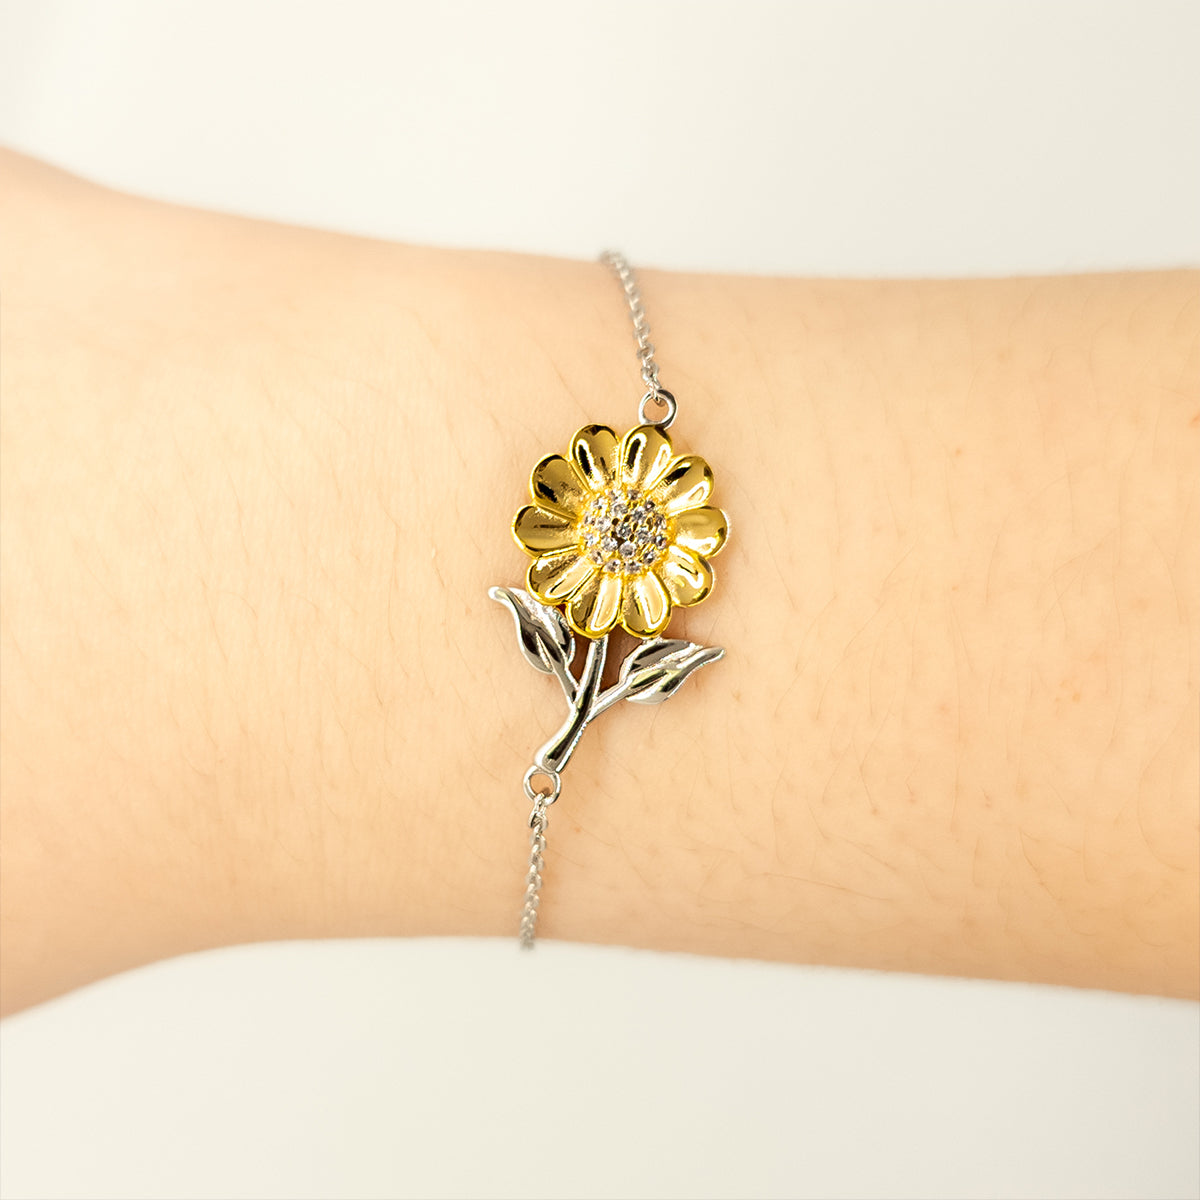 Special Stepparent Sunflower Bracelet Gift You Will Always Have a Place in My Heart, Inspirational Engraved Jewelry for Birthday, Christmas, Mothers Day, Graduation, Unique Remembrance for Step Mom or Dad